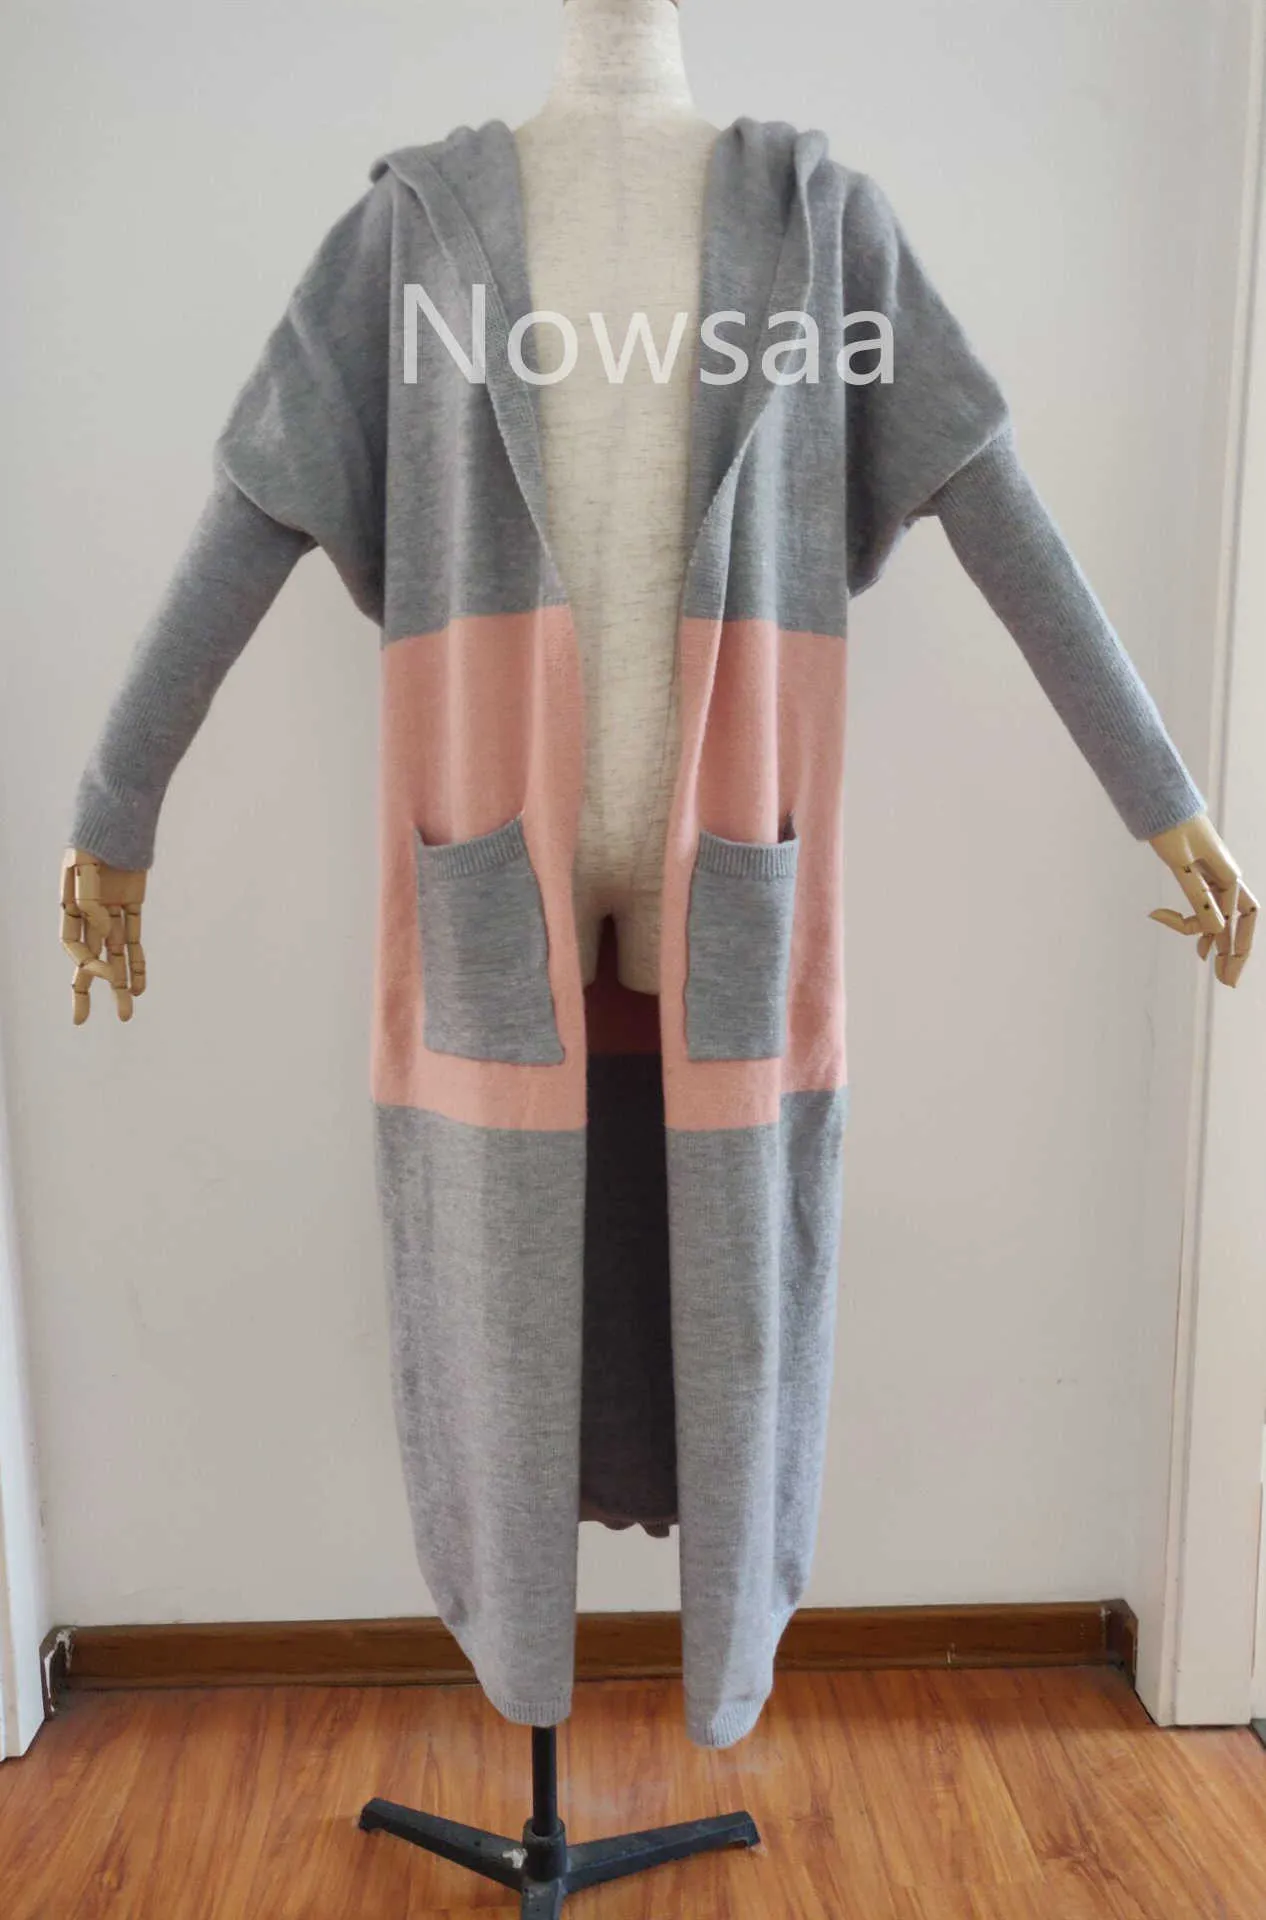 Nowssa Autumn Women Knitted Sweater Cardigan Open Stitch Hooded Letters Loose Sweaters Fall Fashion for 210914